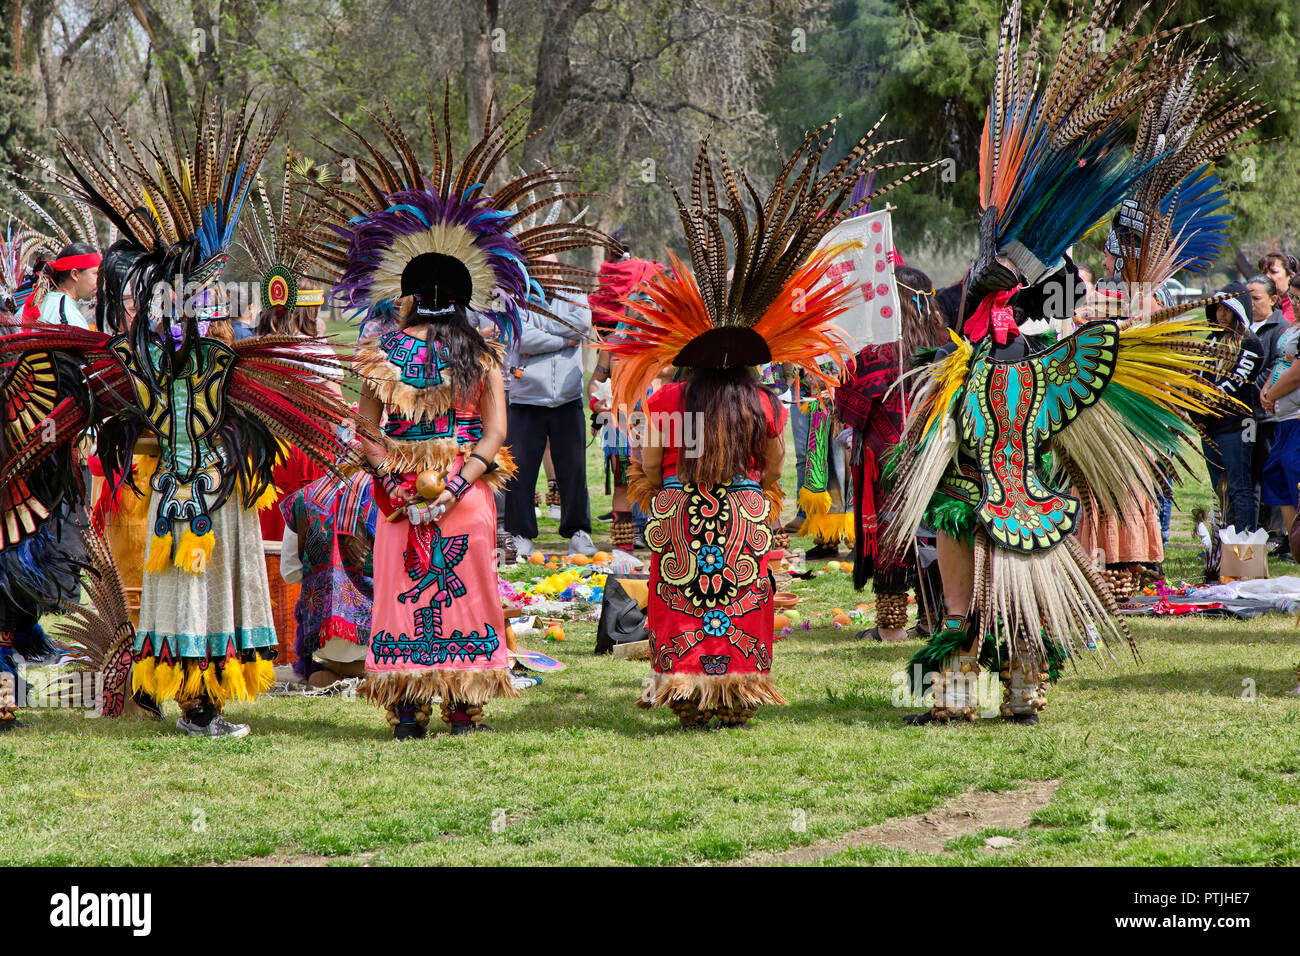 Colorful Aztec group dancers attending cermony & dance, Hart Memorial Park, Bakersfield, Kern County, California, United States. Stock Photo